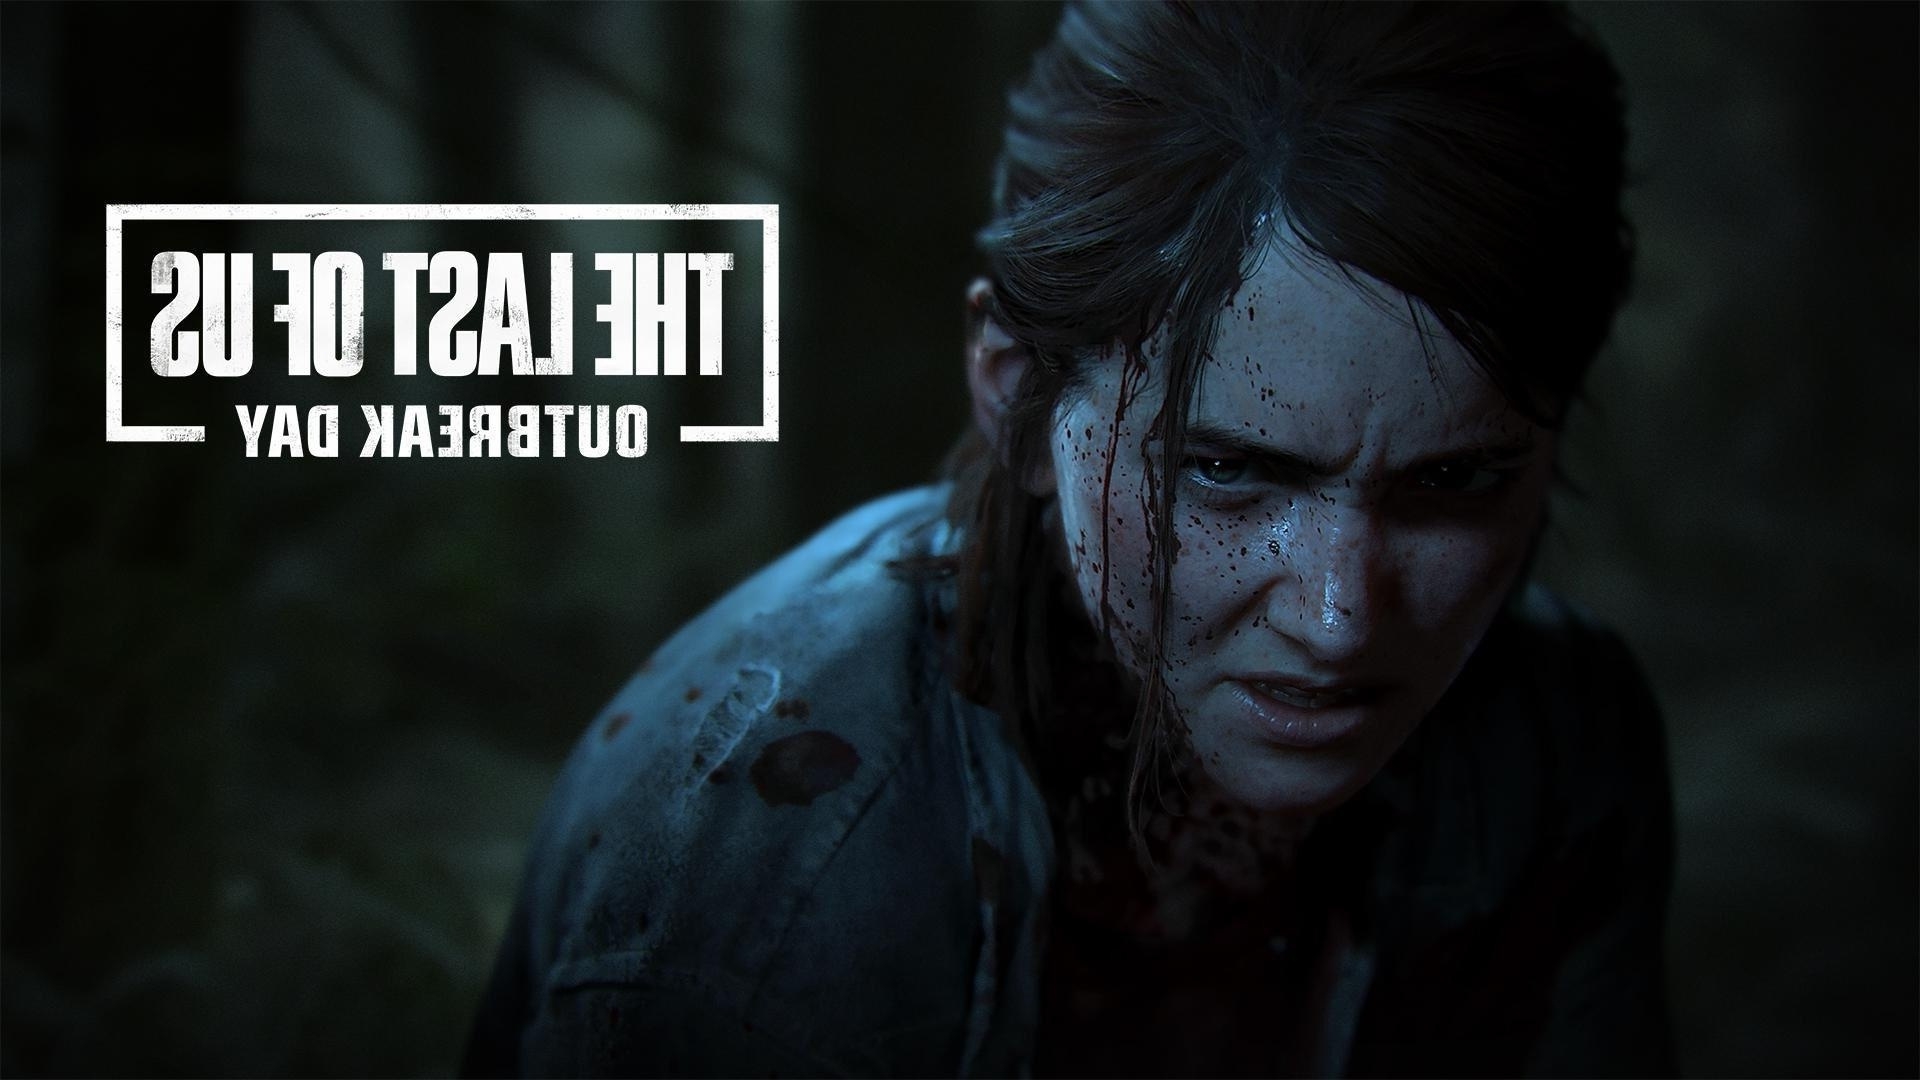 Download wallpaper 1920x1080 the last of us, ellie, outbreak day, full hd,  hdtv, fhd, 1080p wallpaper, 1920x1080 hd background, 15278